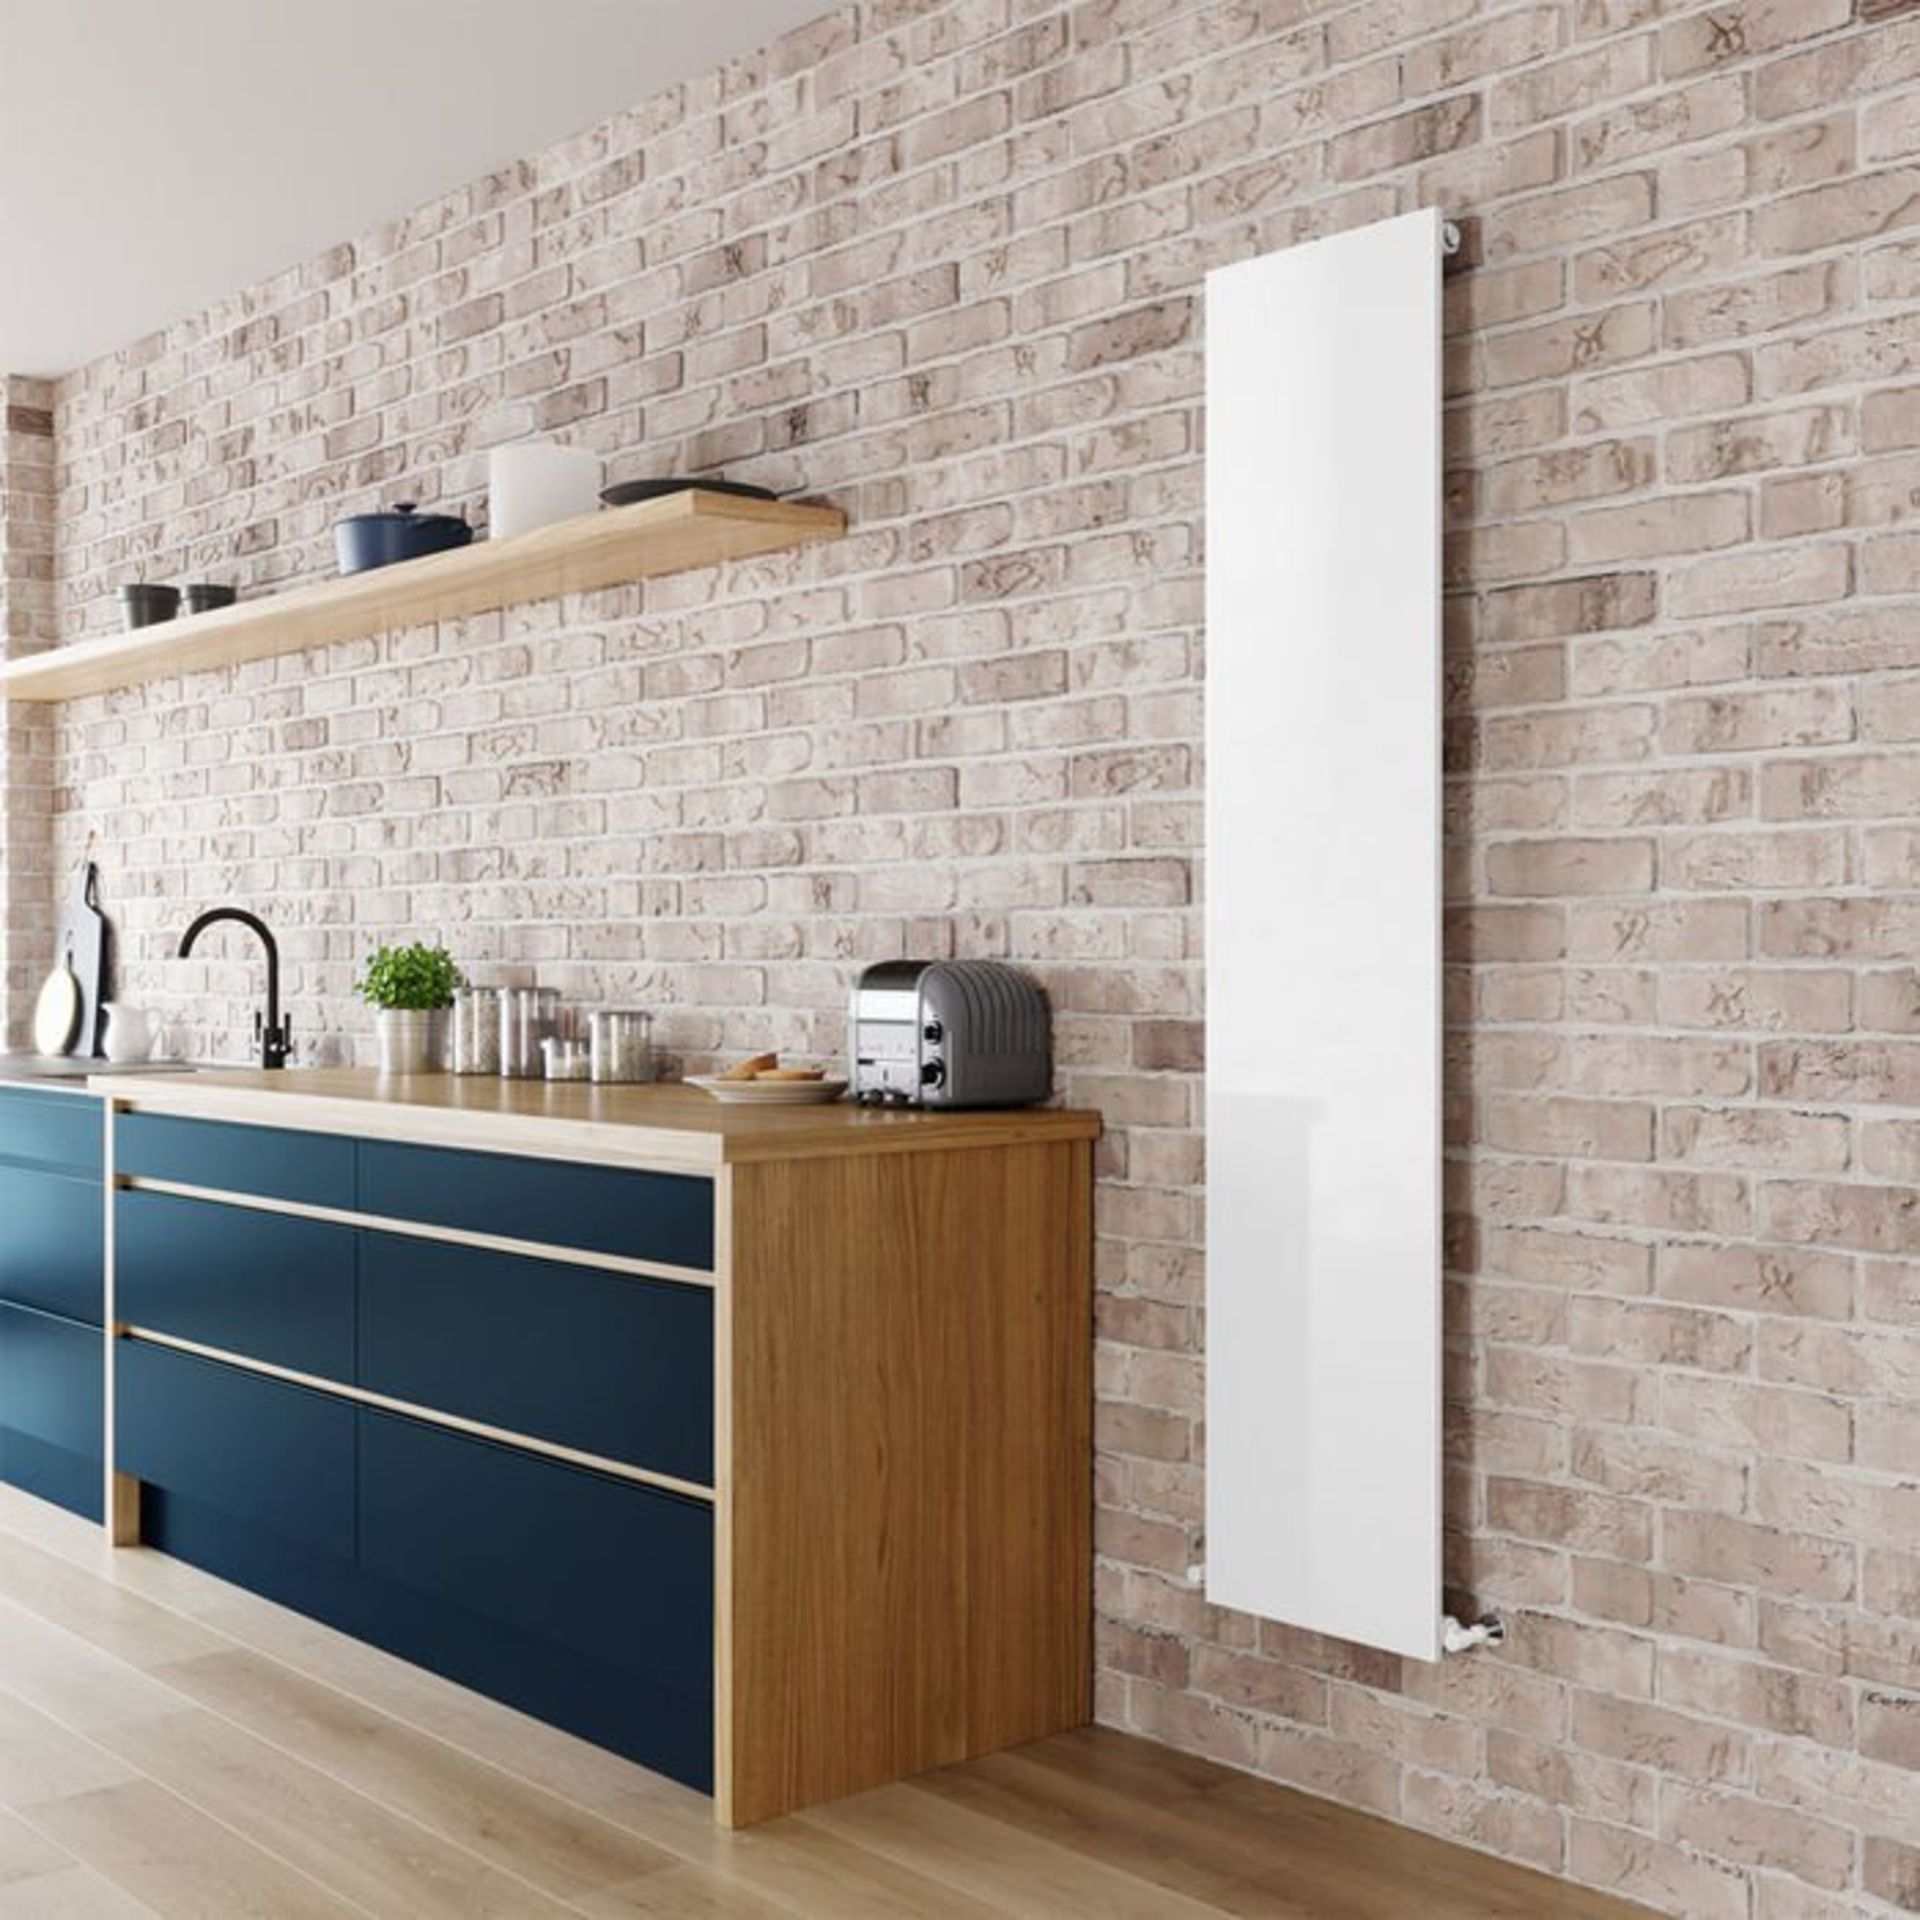 (L73) 1800x380 Ultra Slim White Radiator. RRP £399.99. Tested to BS EN 442 standards Complies with - Image 3 of 3